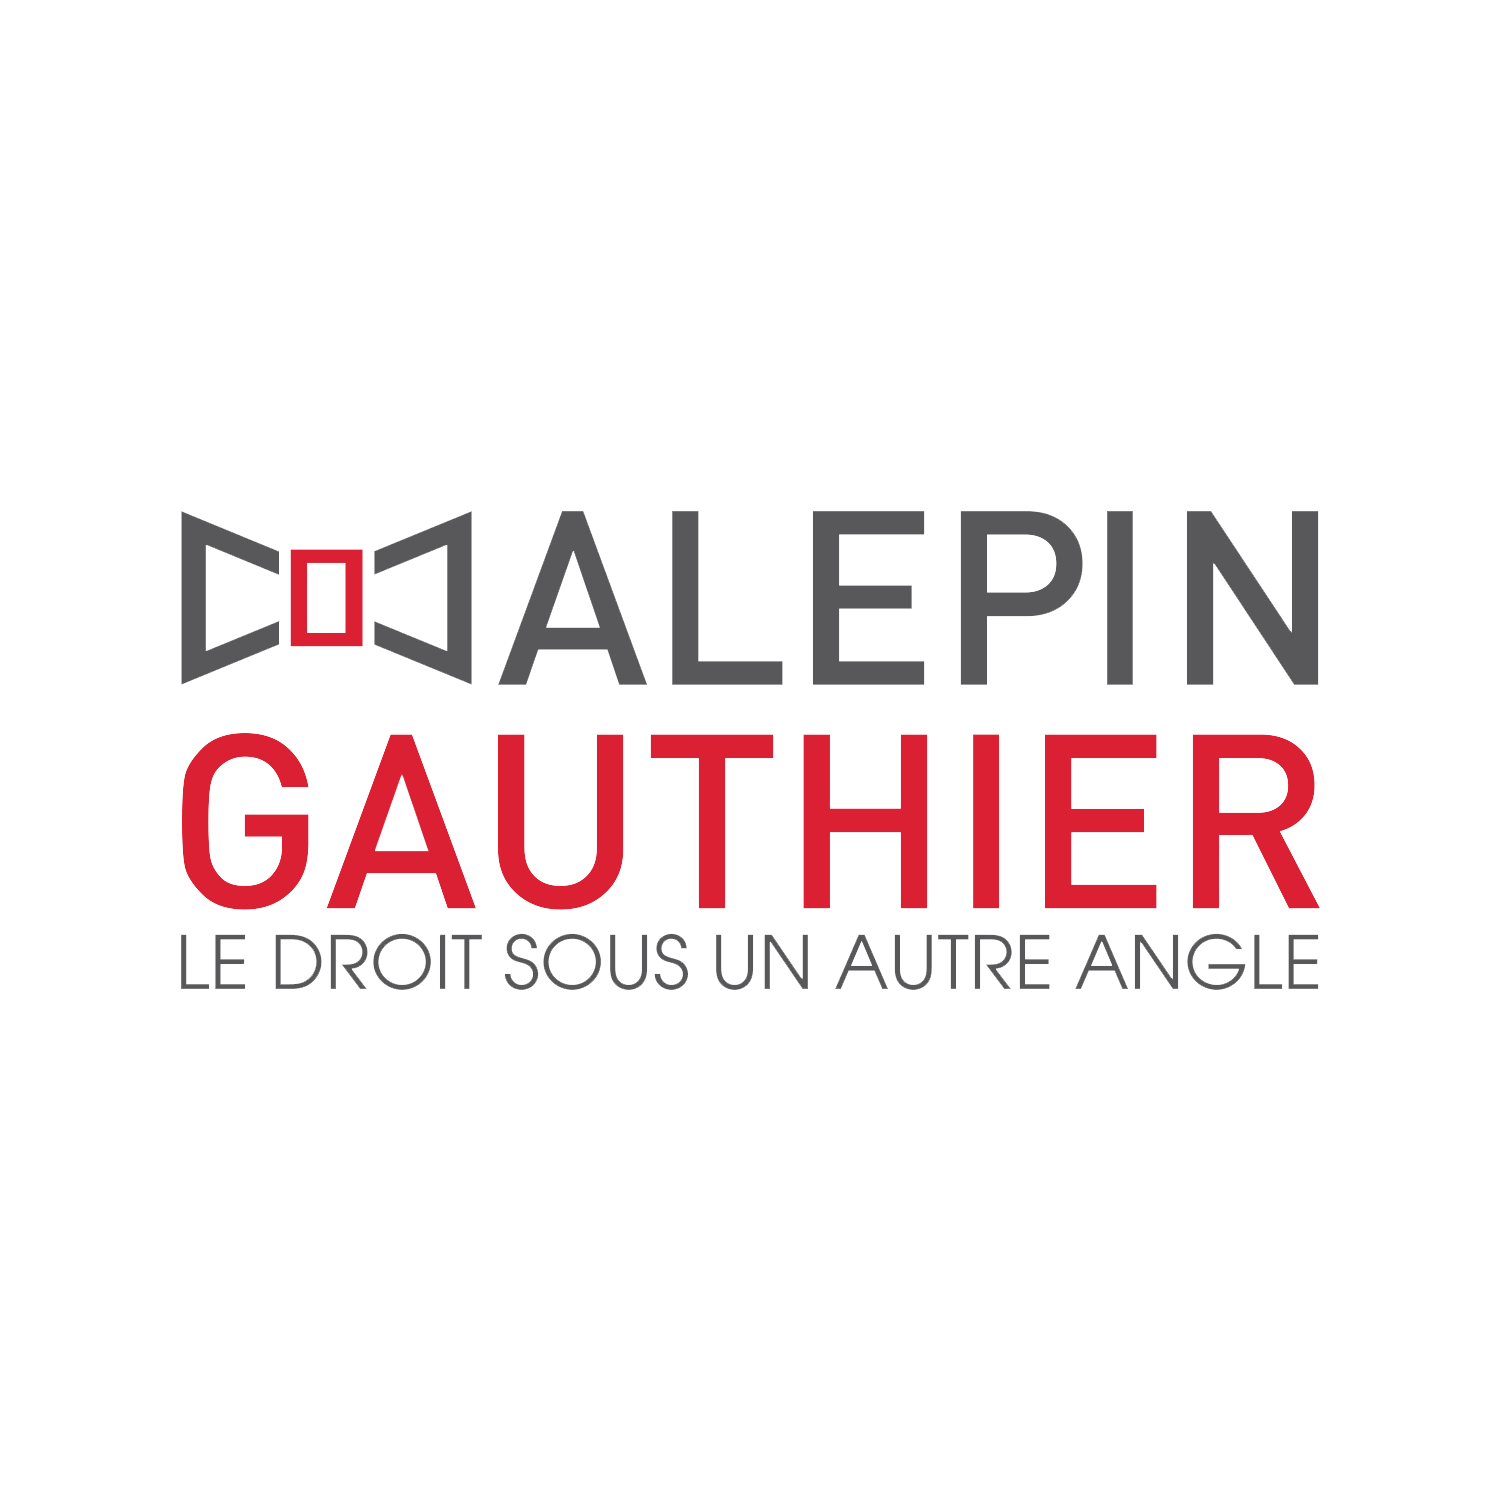 Alepin Gauthier